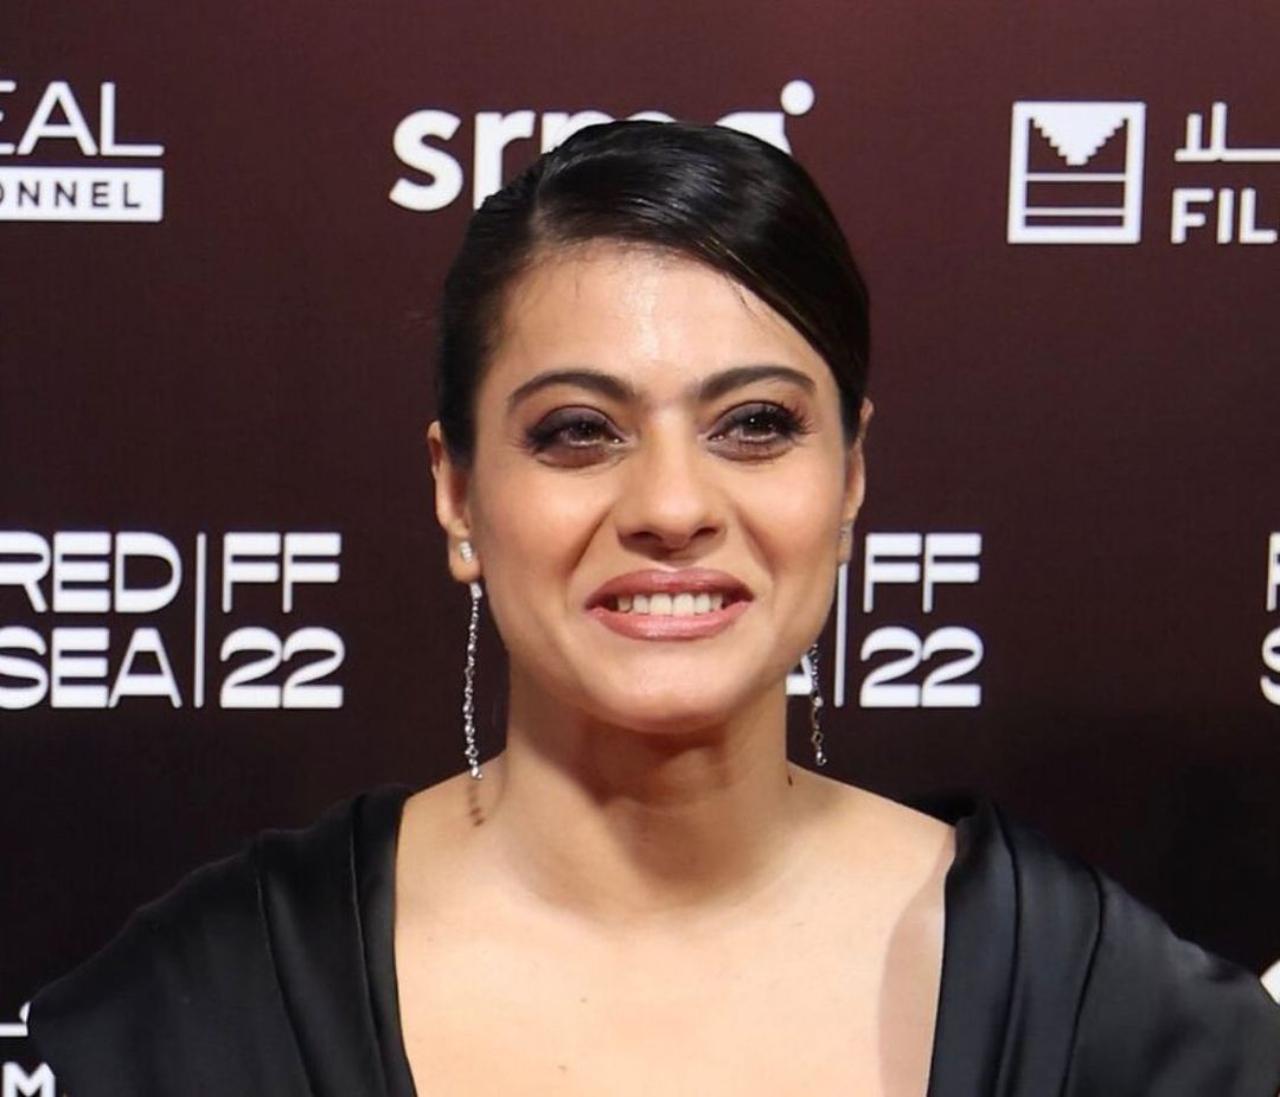 Kajol was her joyous self as she attended the festival for the screening of DDLJ on opening night. She shared the stage with Shah Rukh Khan and the two also recreated scenes from their film DDLJ and Baazigar